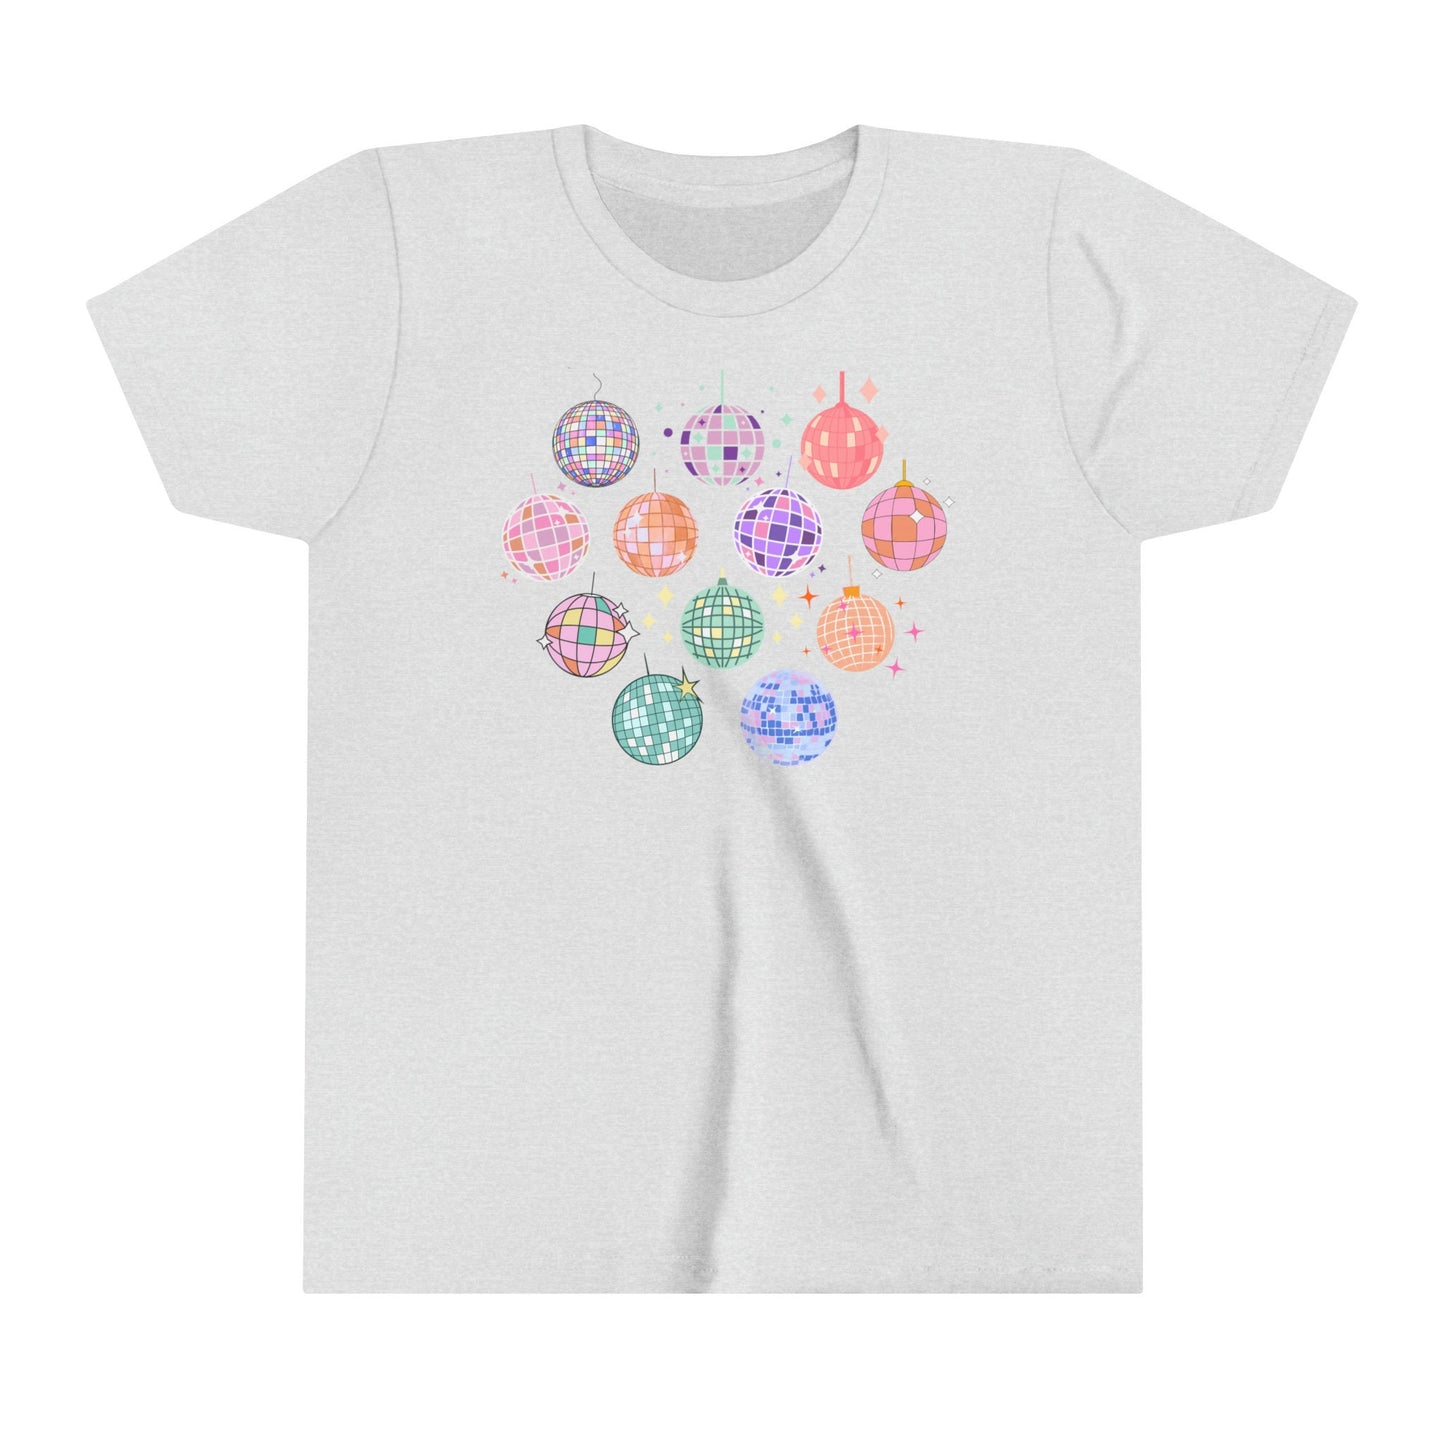 Youth Disco Ball Shirt, Retro Party Tee, Rainbow Shirts, Subtle Pride Outfit, Mirrorball Sweatshirt, Cute Womens Tops for Summer